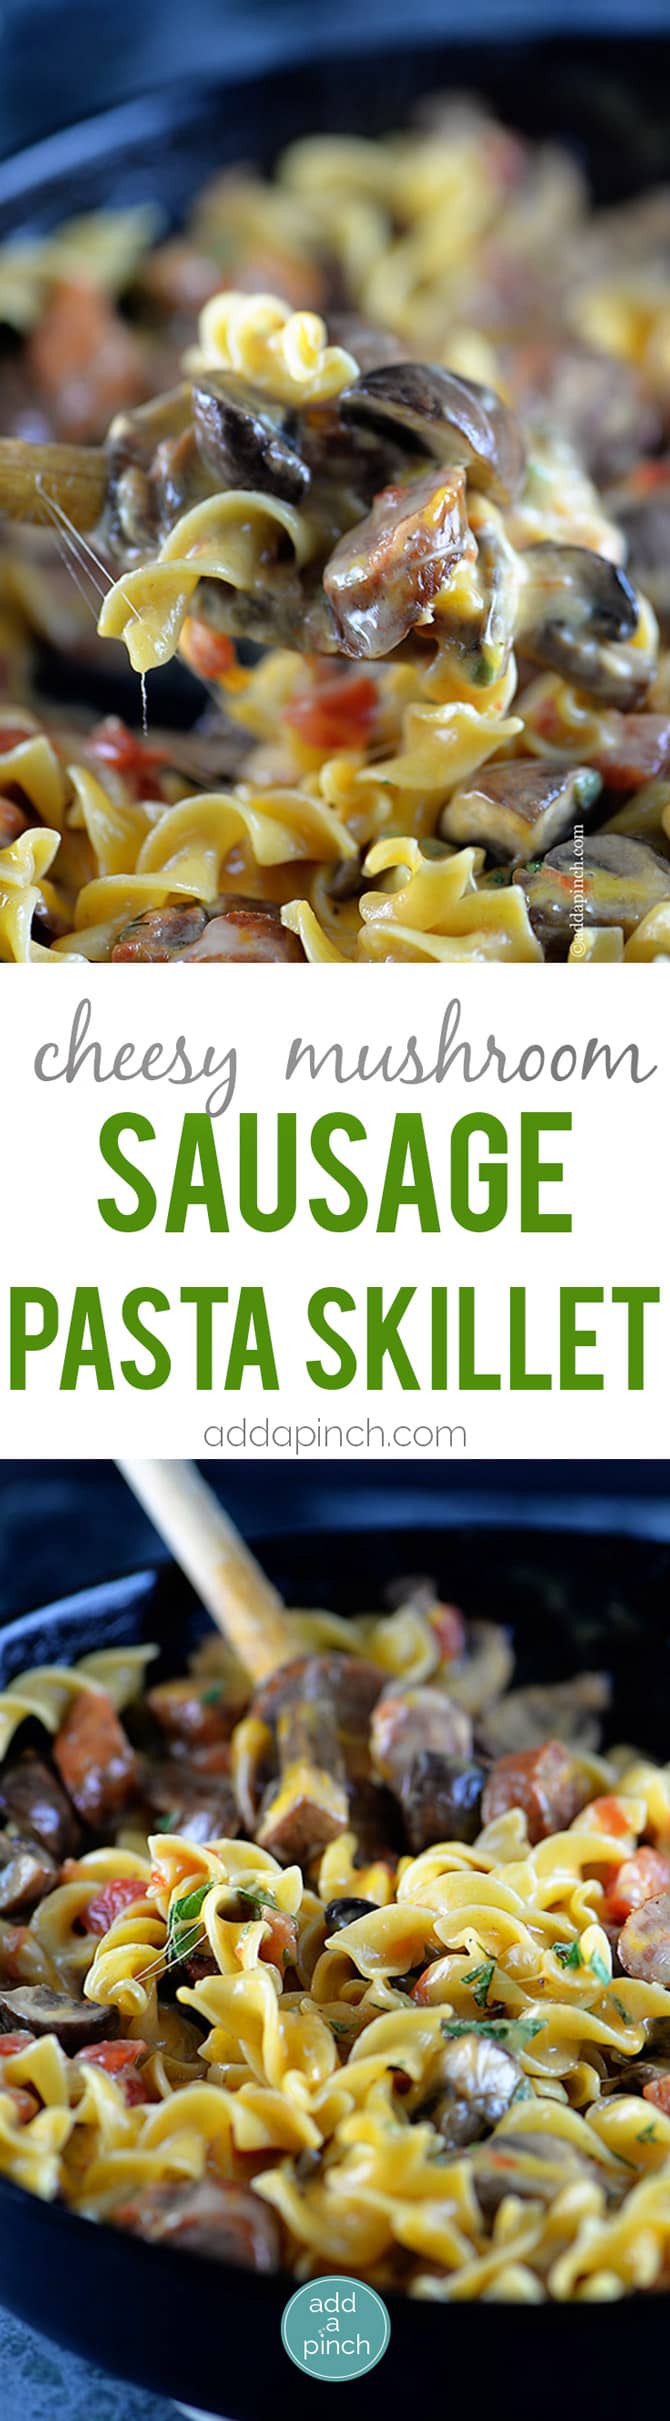 Cheesy Mushroom Sausage Pasta Recipe - This cheesy mushroom sausage pasta skillet makes a delicious, quick meal. Made with portobello mushrooms, sausage, pasta, and lots of cheese, this one skillet pasta recipe is a people pleaser! // addapinch.com